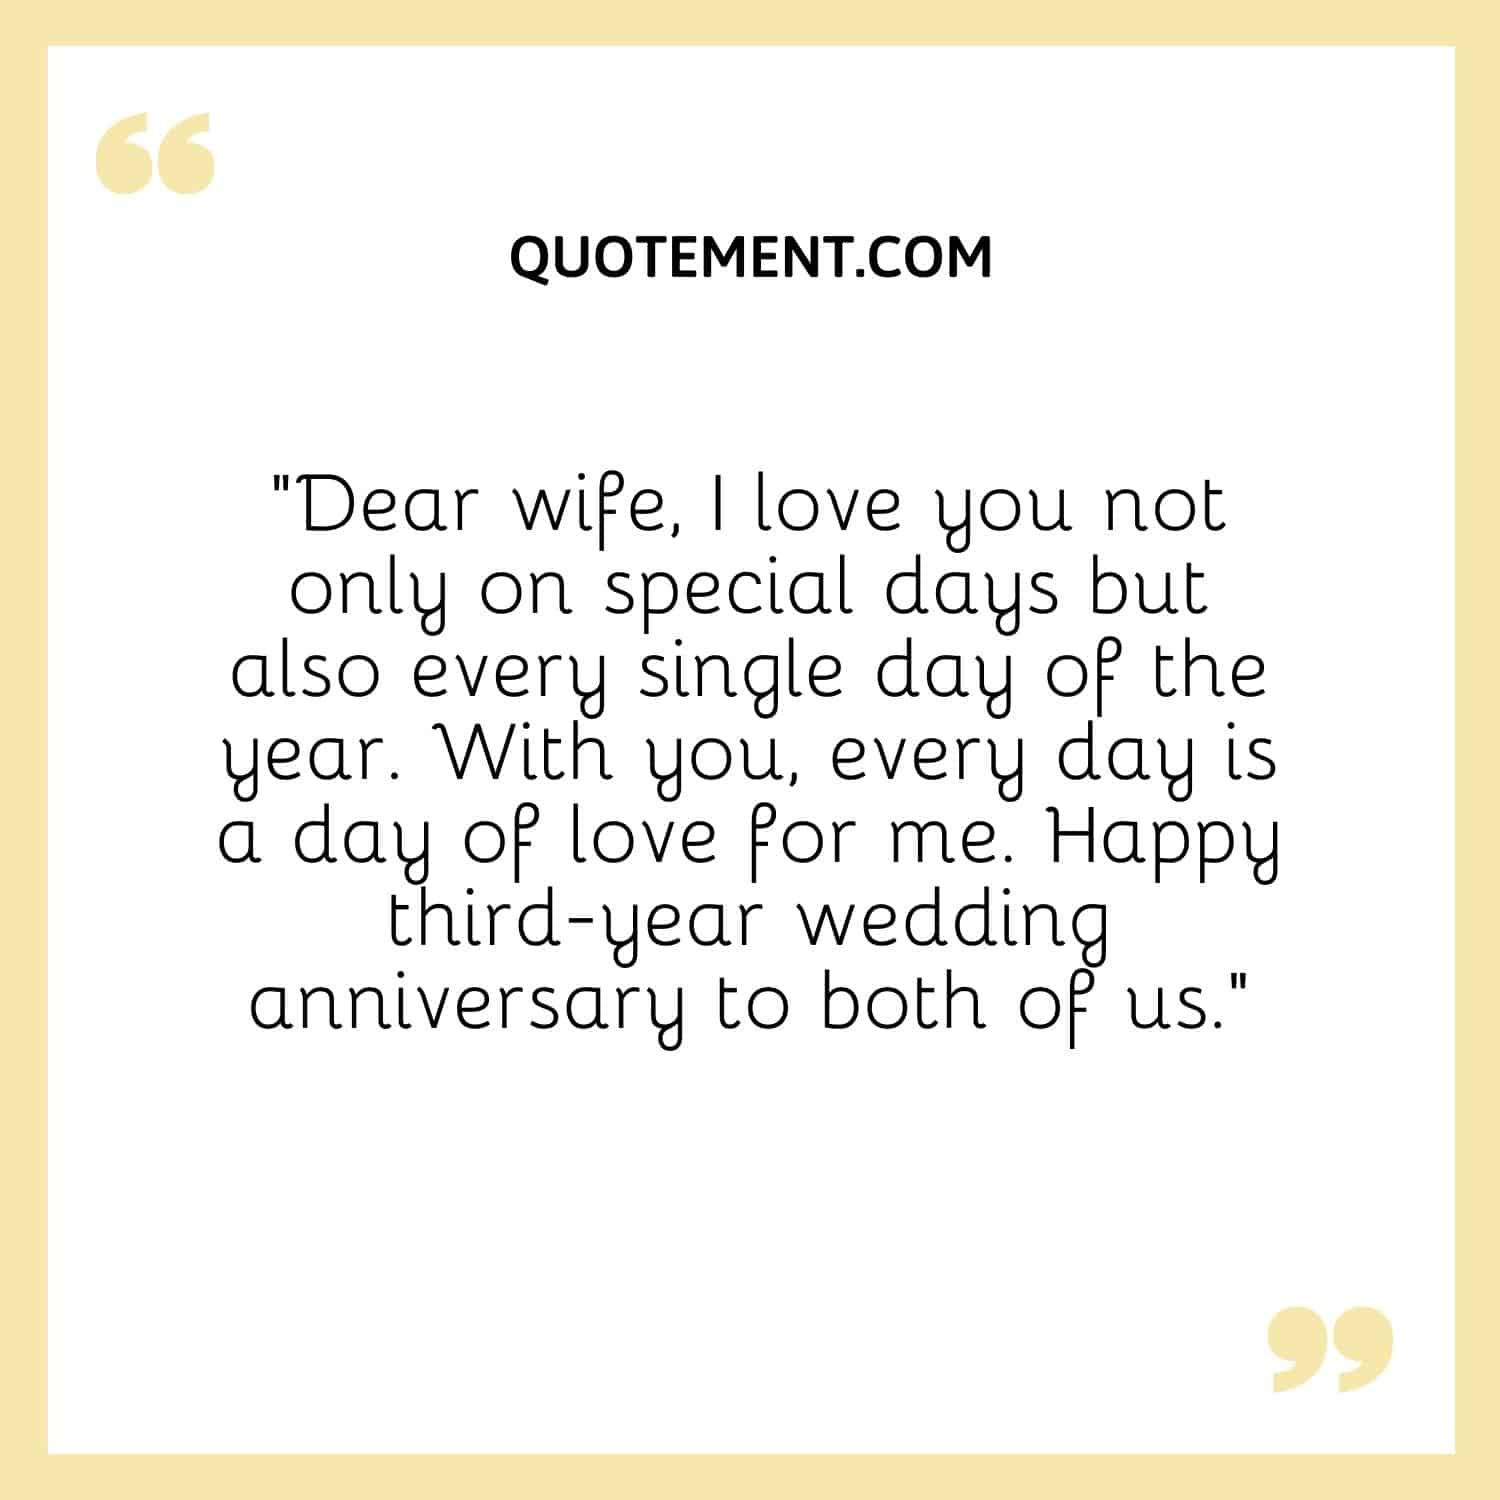 “Dear wife, I love you not only on special days but also every single day of the year. With you, every day is a day of love for me. Happy third-year wedding anniversary to both of us.”